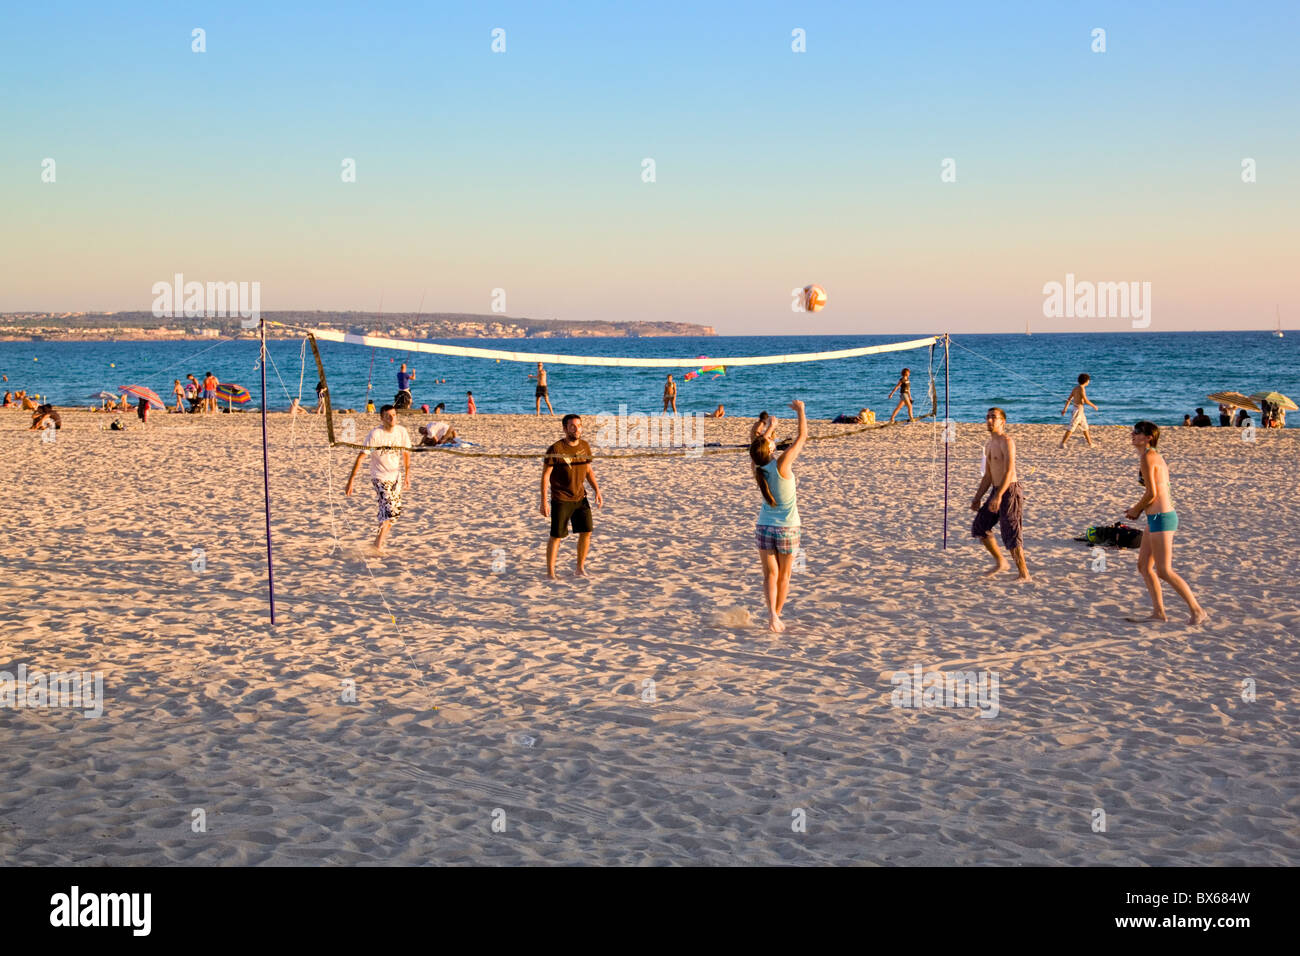 Five young boys and girls playing volleyball on the beach at dusk Stock Photo